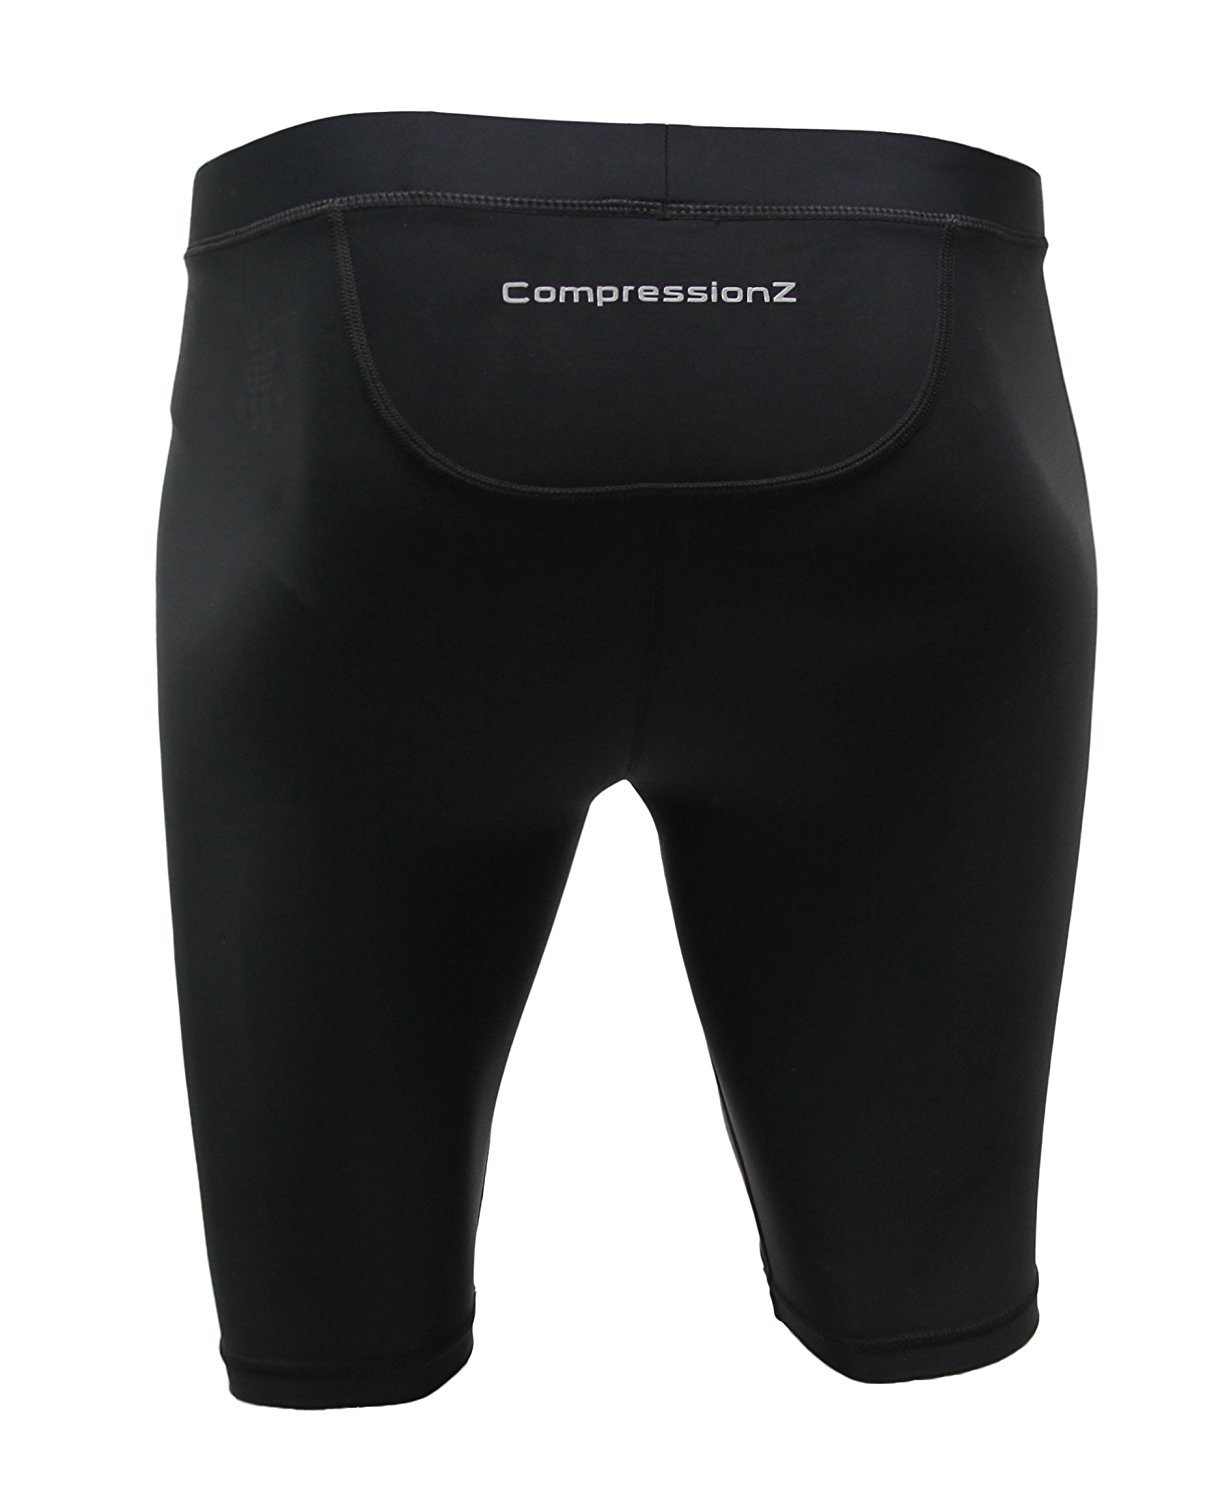 Which are the best compression shorts for glute injury?